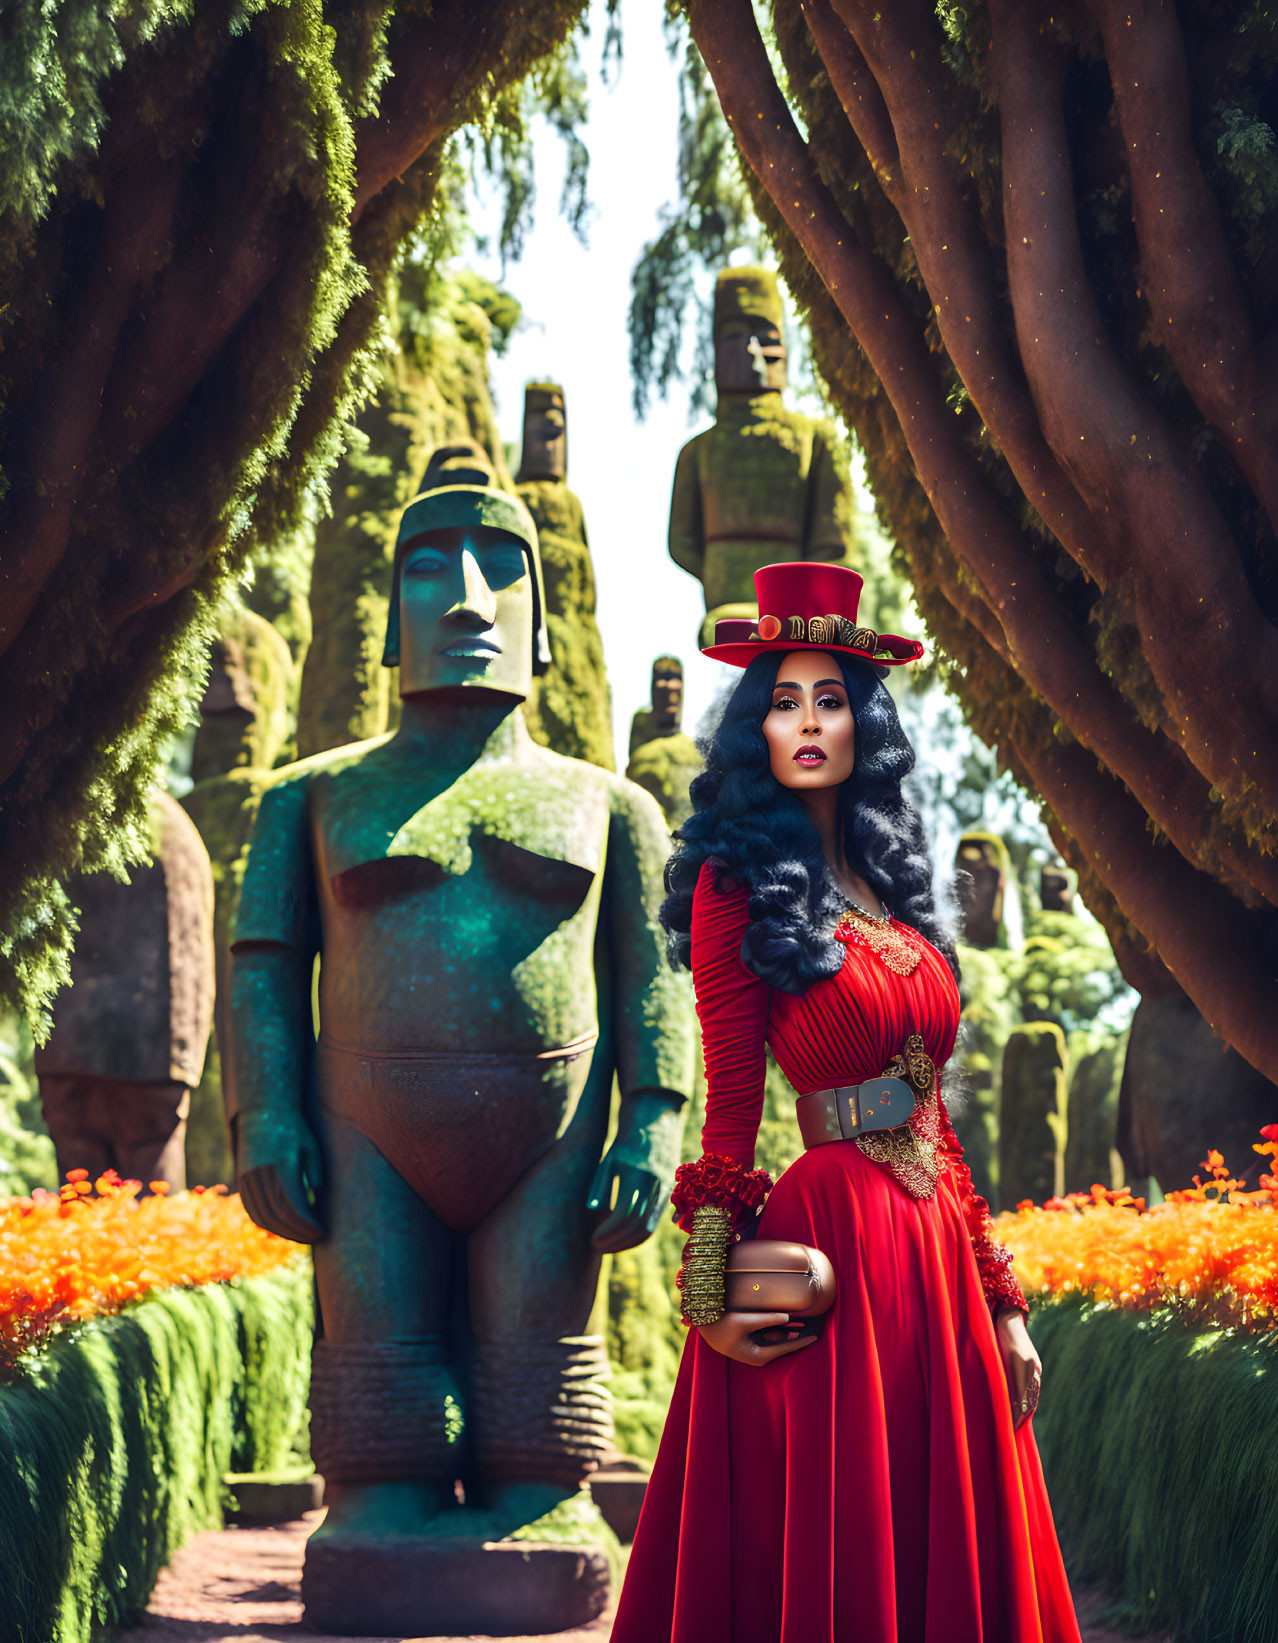 Person in Red Dress and Top Hat in Lush Garden with Statues and Orange Flowers